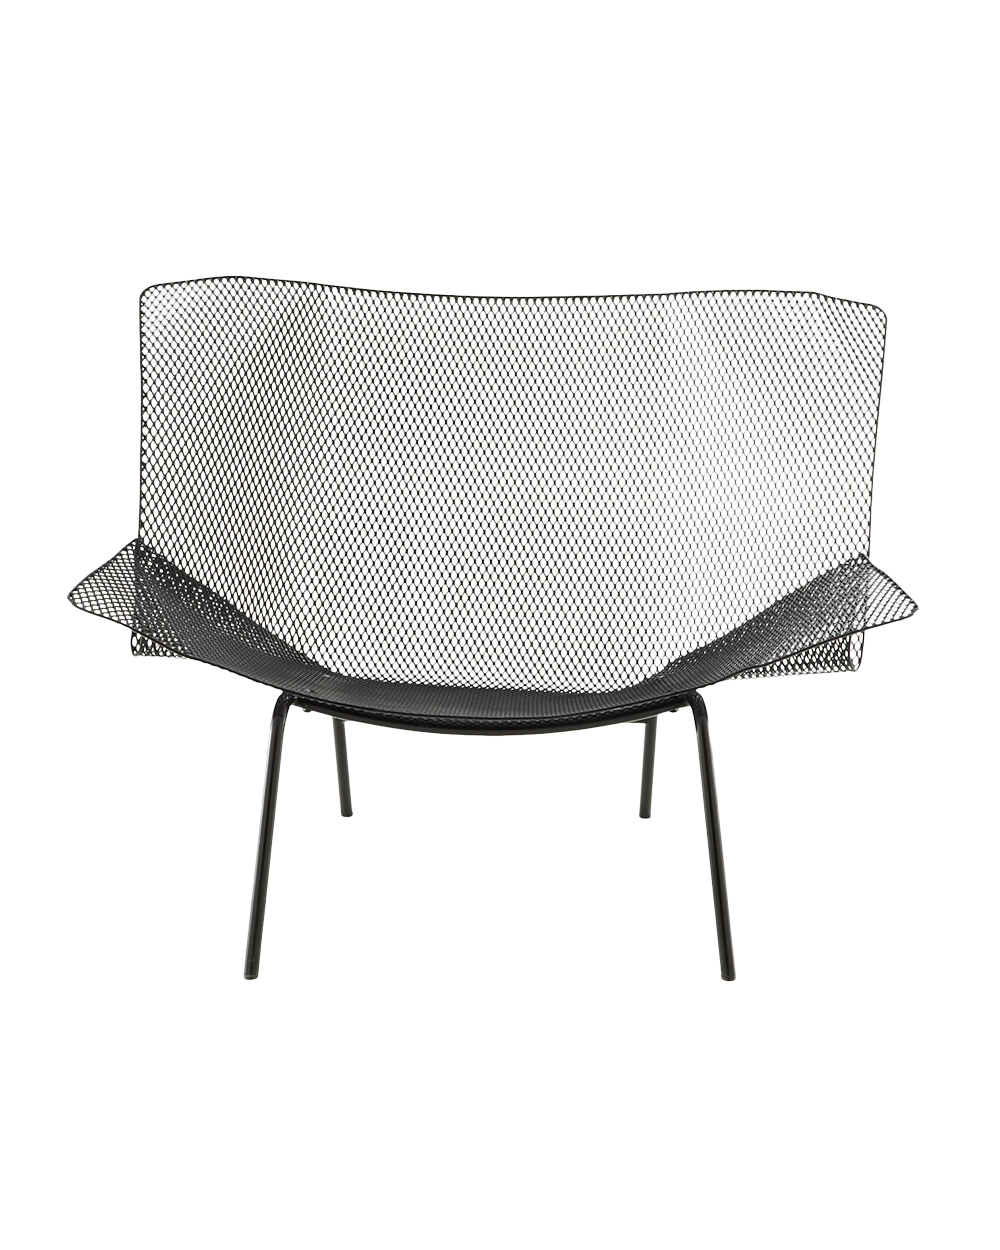 Chair by Francois Azambourg, $2334, from Domo